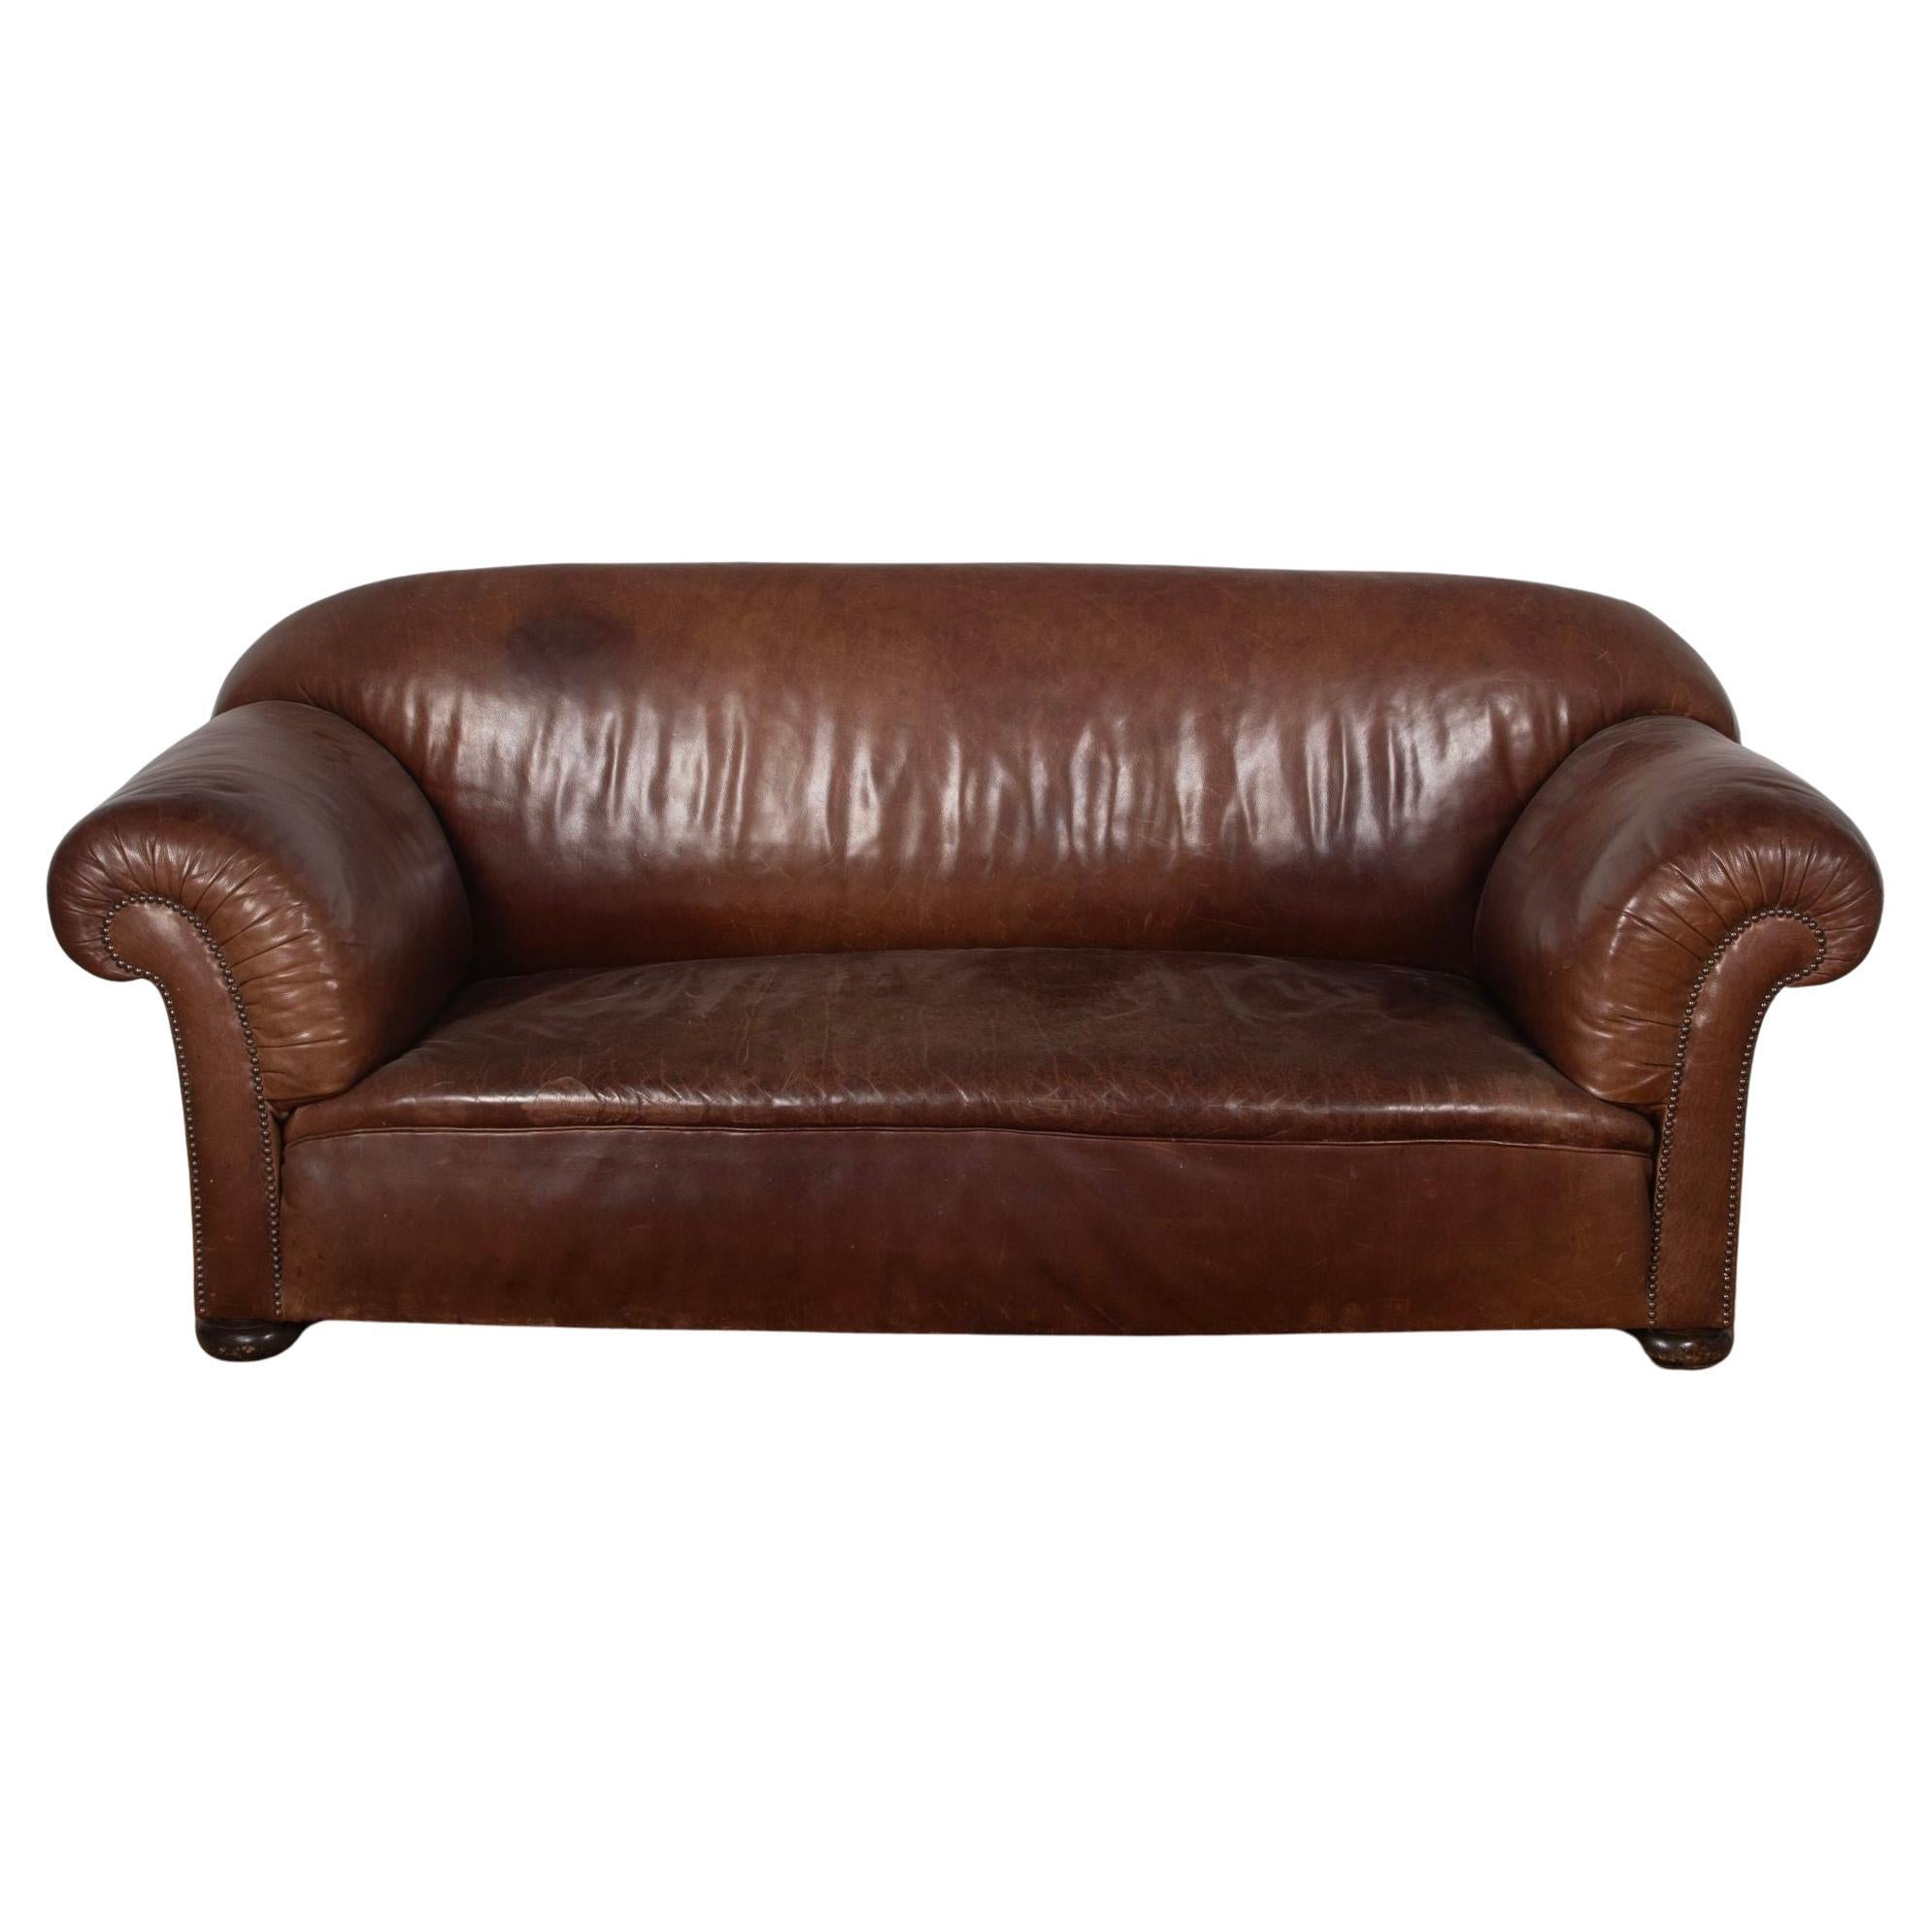 19th Century Victorian Leather Sofa For Sale